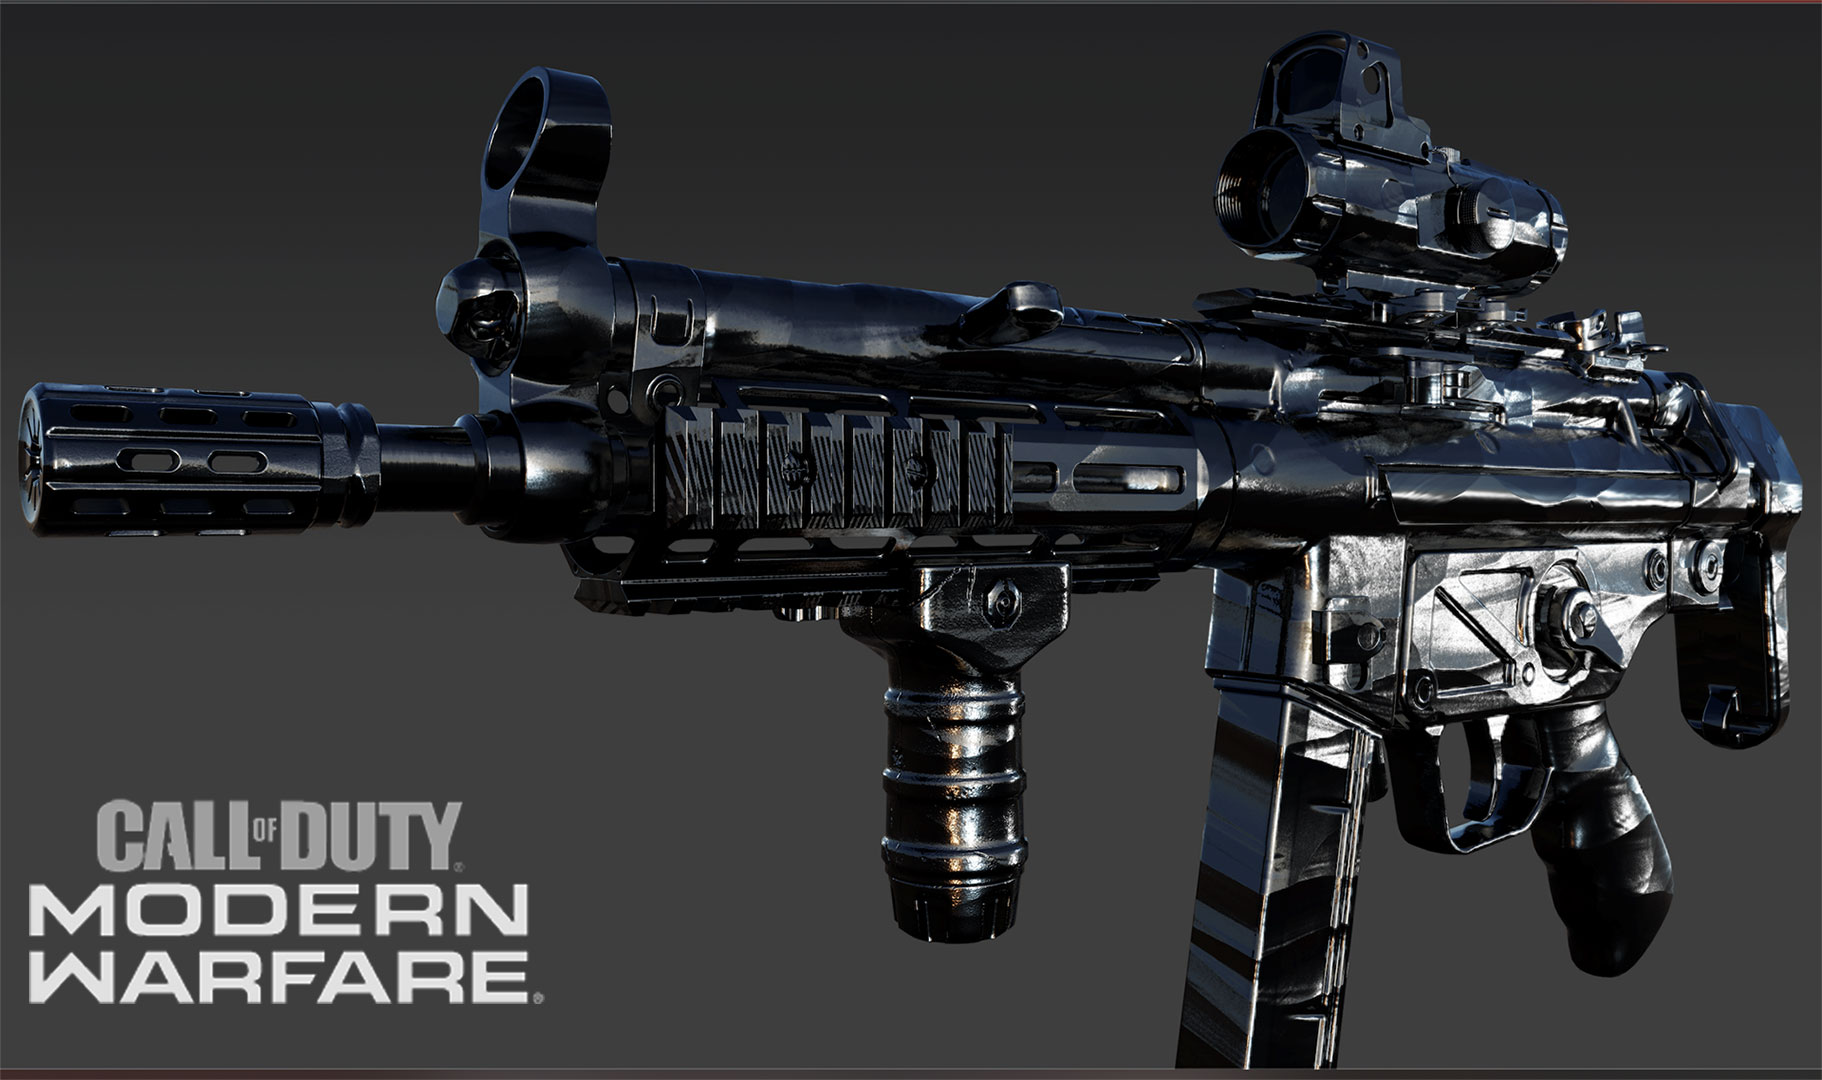 Become A True Weapon Master With Obsidian Camo Now In Call Of Duty Modern Warfare - fn fal for arsenal wars roblox